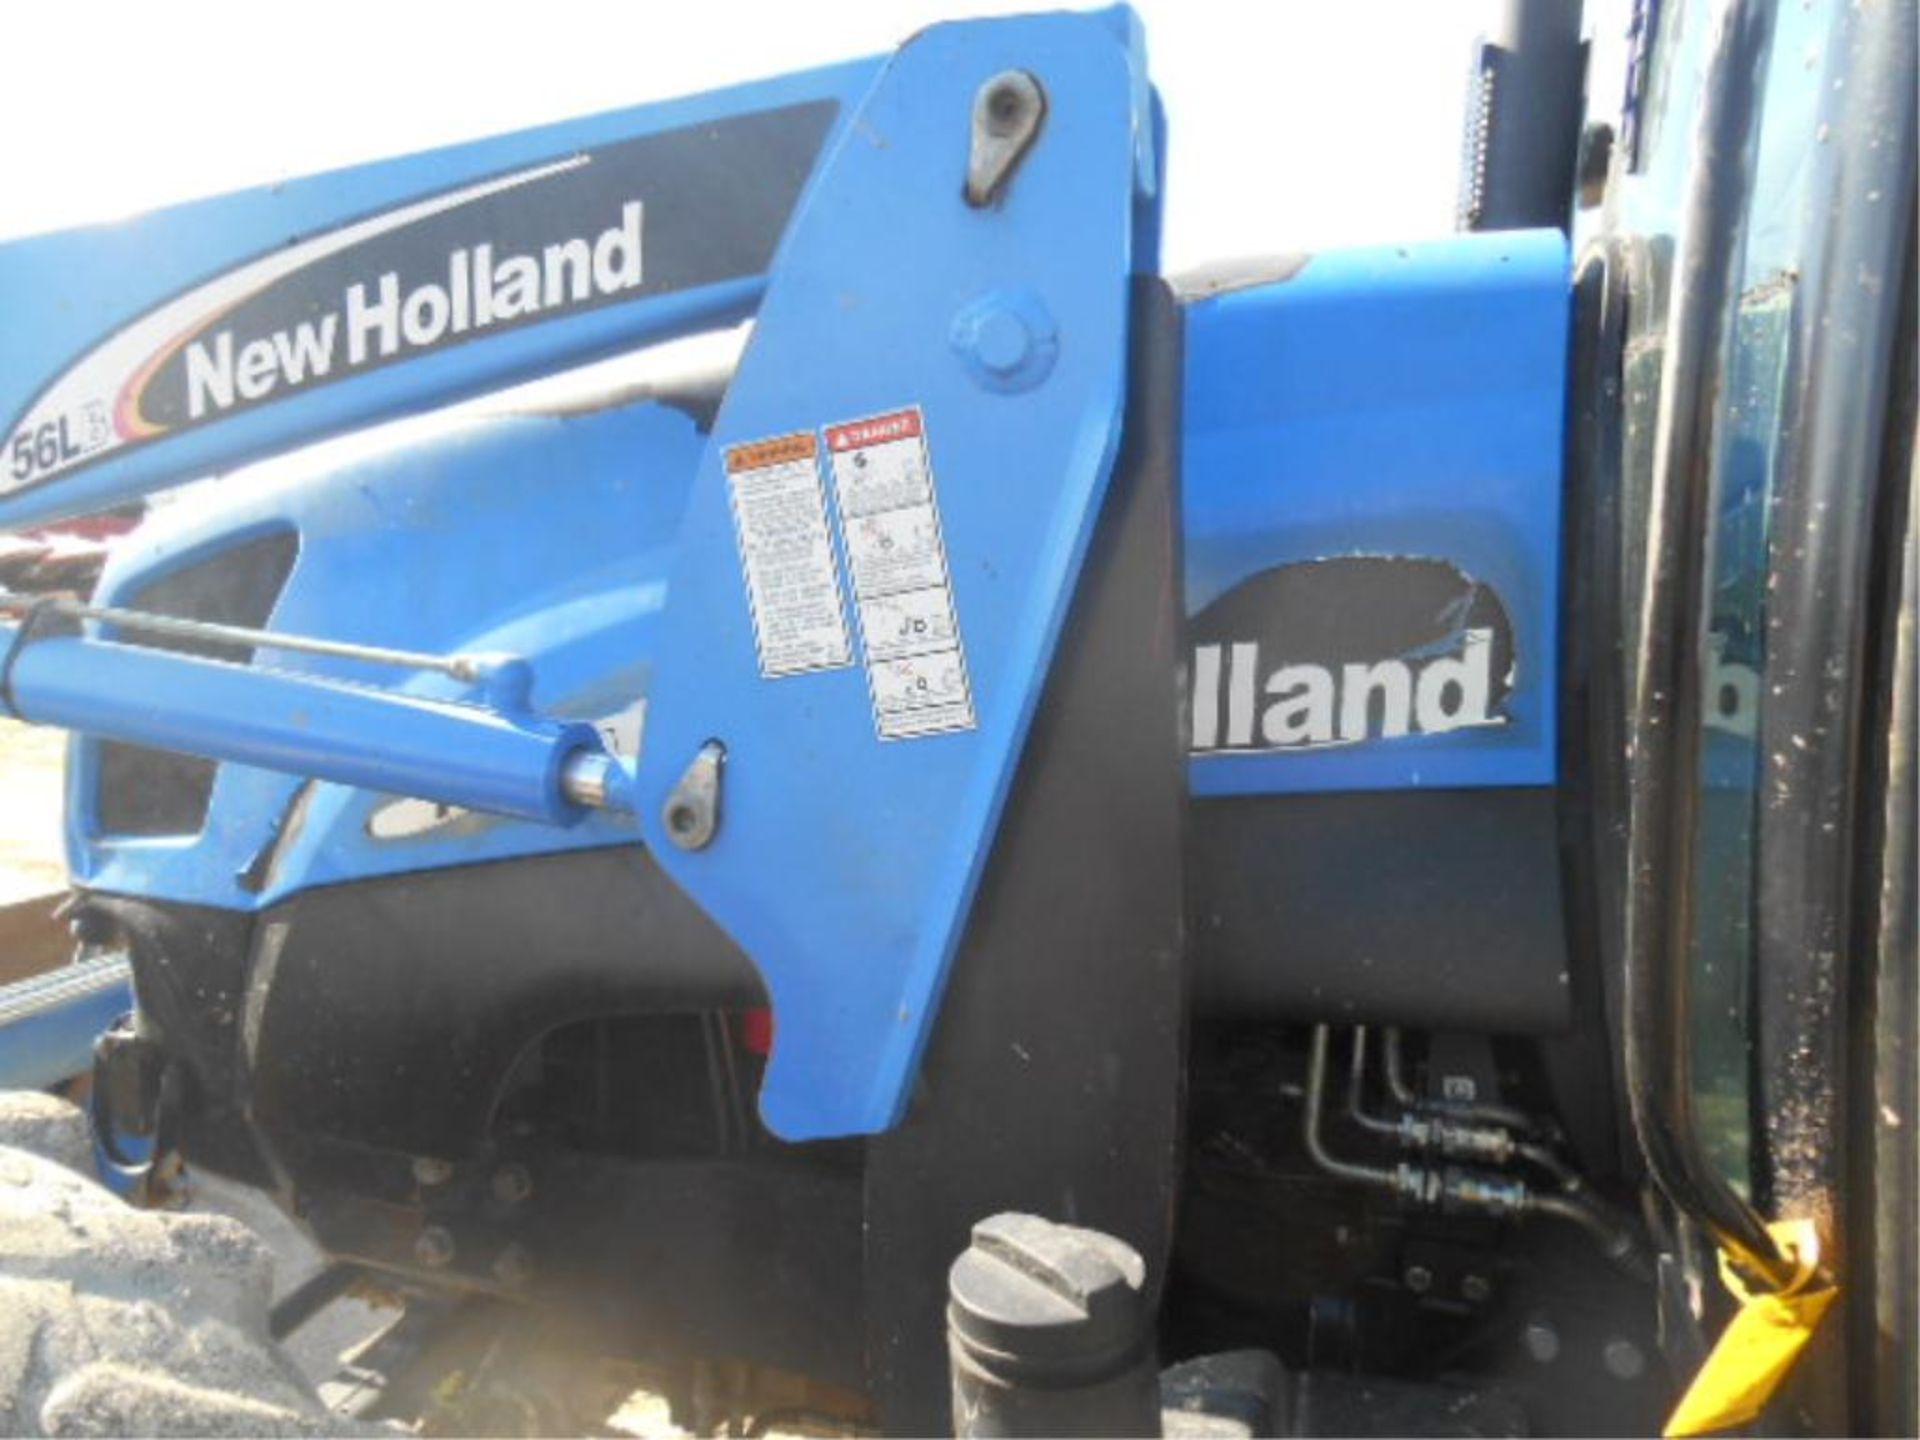 New Holland TS115 Tractor. '06, sn#ACP258890 9523 Hrs, MFWD, Cab, 115 HP, 12/2, 3 Pt, 2 Hyd. - Image 9 of 20